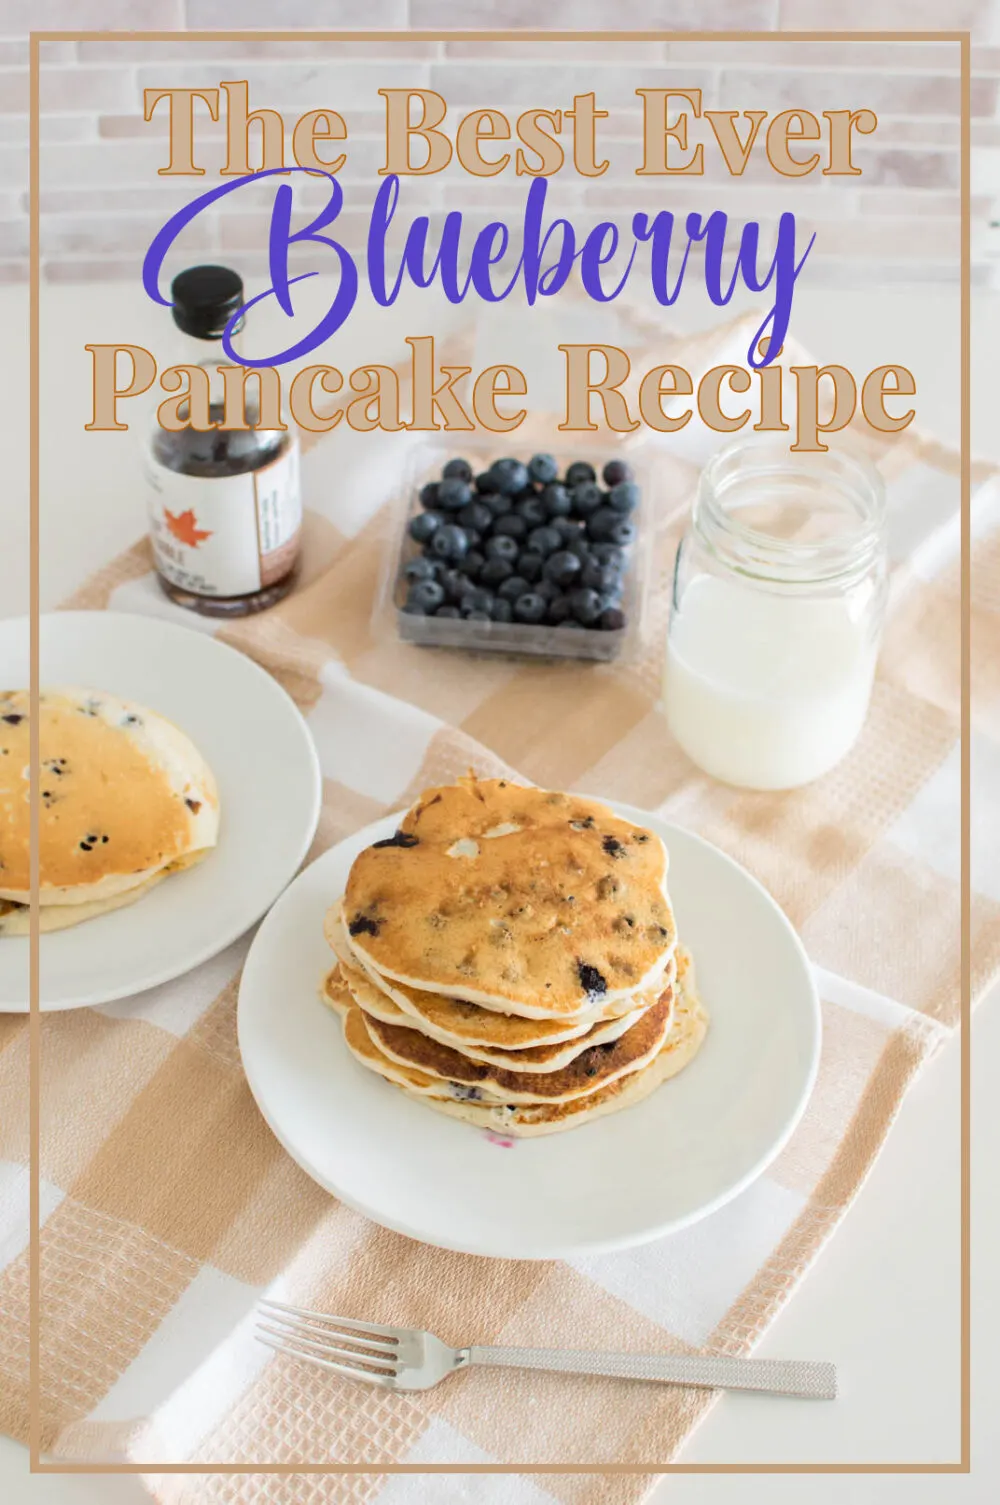 This recipe for blueberry pancakes is out of this world! With just a few simple ingredients, you can make the fluffiest, most flavorful pancakes. This recipe is perfect for Sunday brunches and celebratory breakfasts.